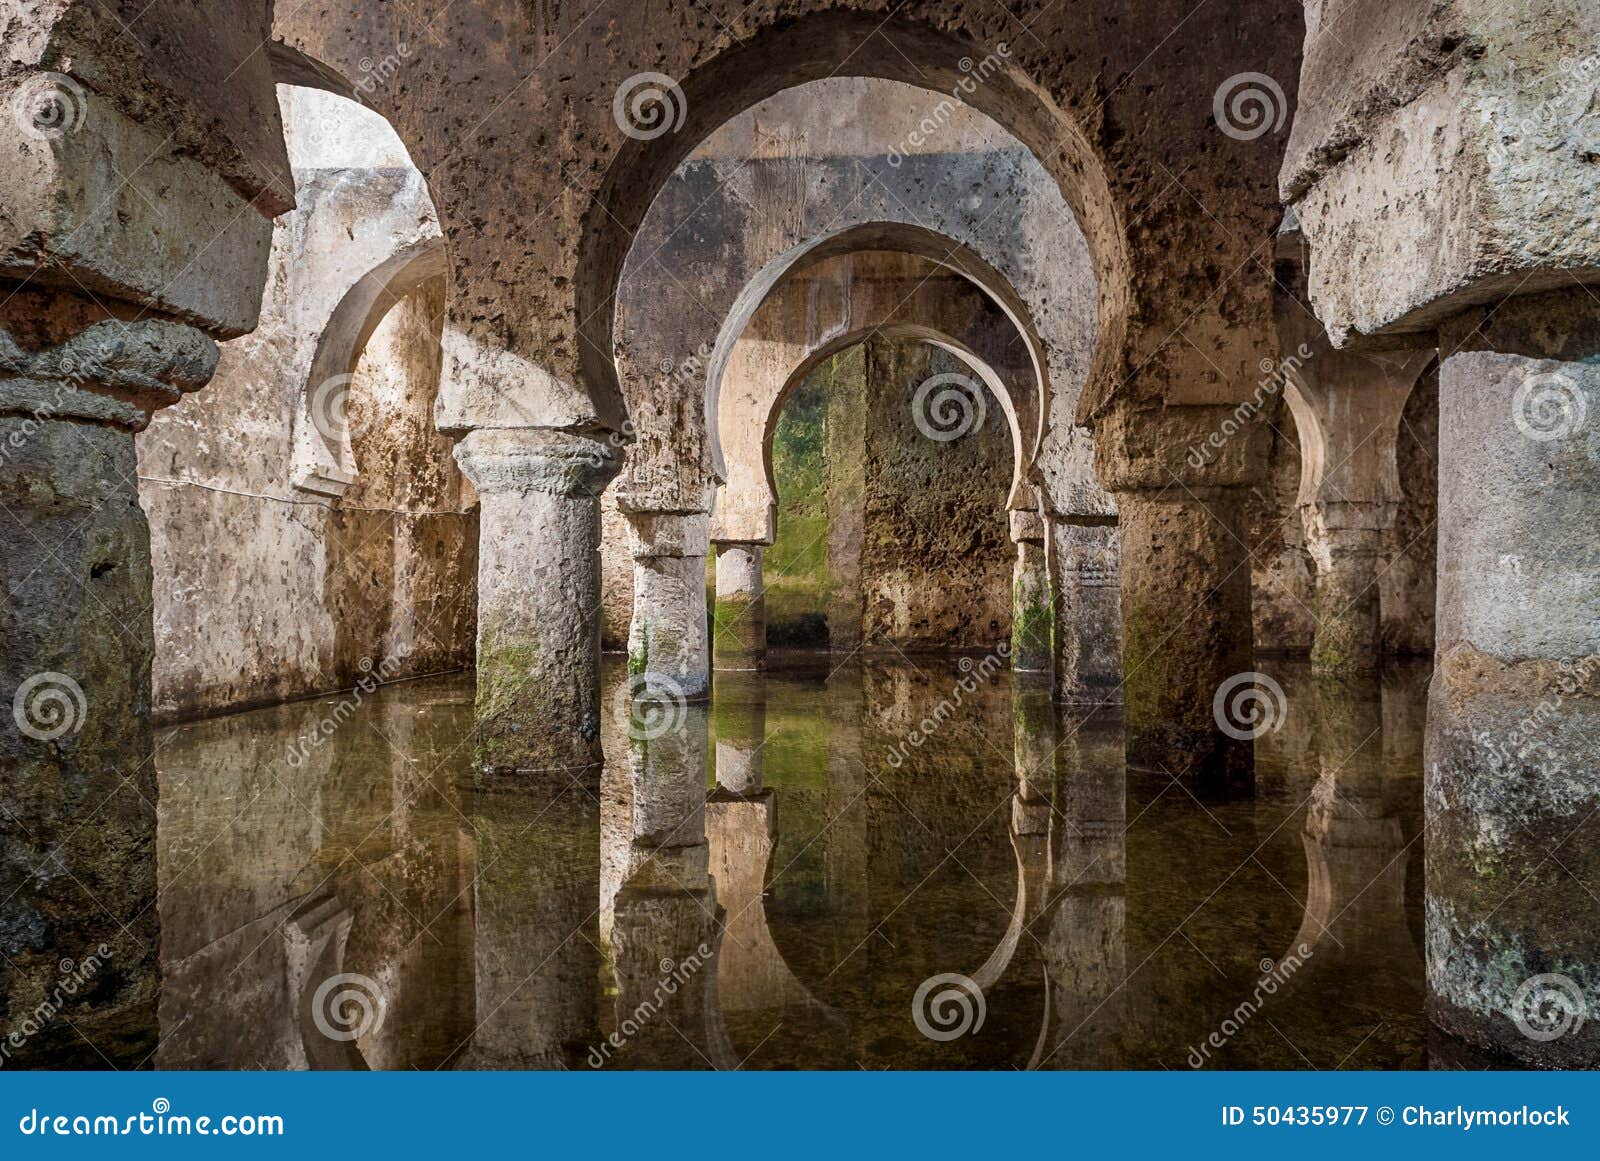 interior view of the arab cistern caceres spain, reflections of the arches in the water